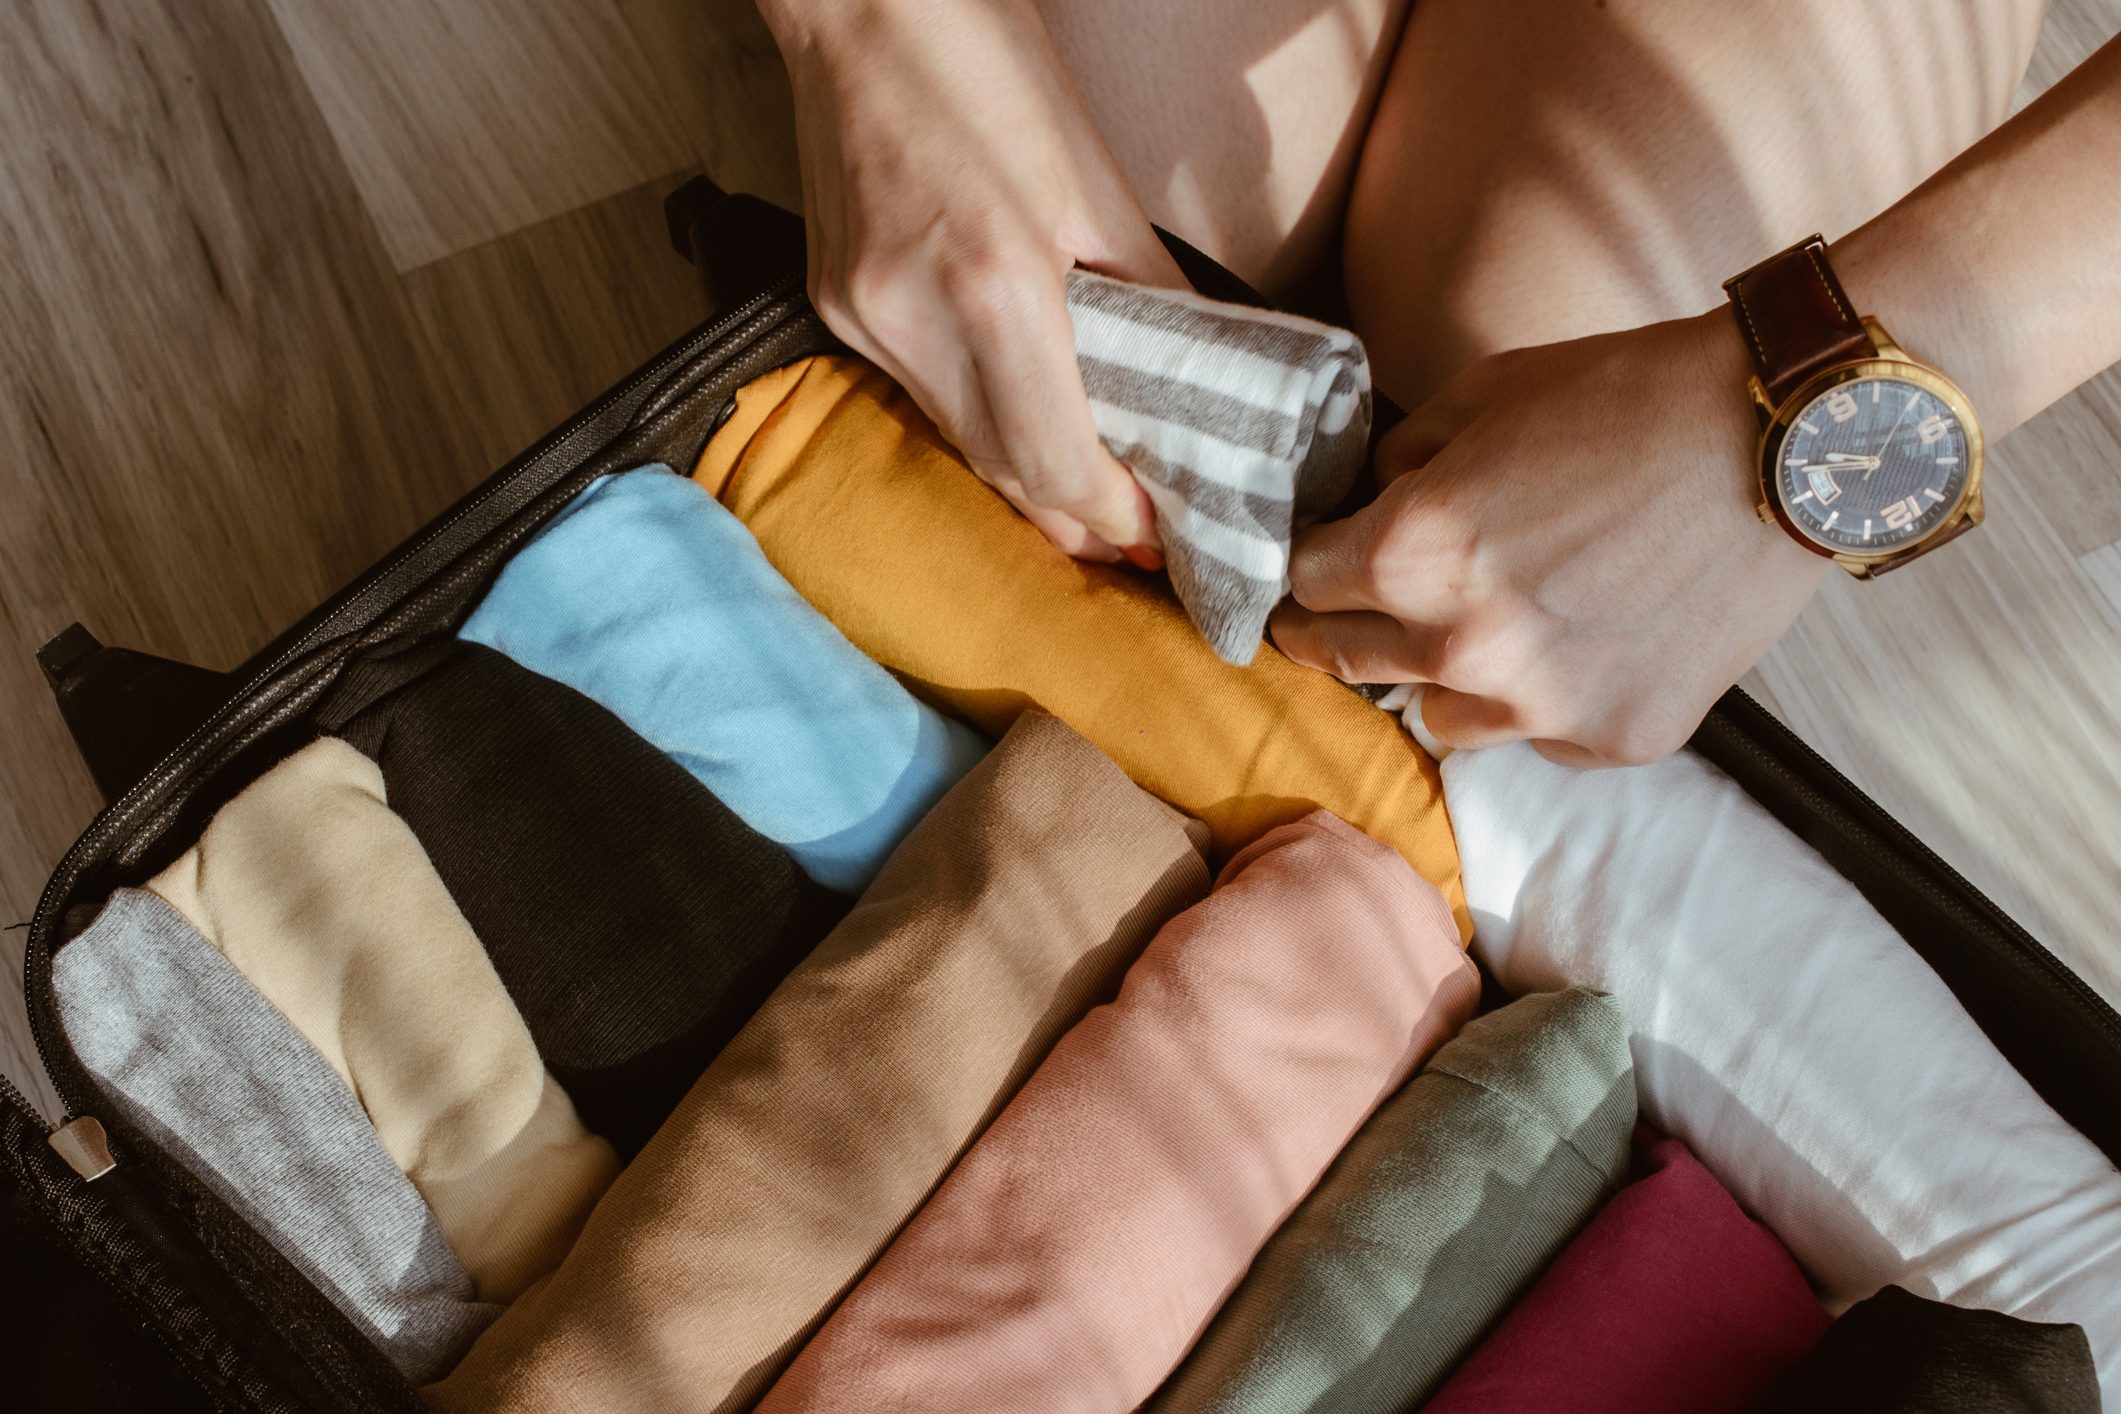 <p>Folding clothes that could be rolled is one of the most common <a href="https://www.rd.com/list/packing-mistakes/" rel="noopener noreferrer">packing mistakes</a> travelers make. Tightly roll items such as T-shirts, pajamas, casual pants and dresses to optimize suitcase space and avoid creasing. Roll heavy items (such as jeans) first and place at the bottom. Follow with thinner rolled items on top of those to make it easier to force your suitcase closed.</p> <p>If you're packing bulky or stiff items, such as sweaters or starched shirts, fold these (try using a <a href="https://www.walmart.com/ip/Slate-Travel-Garment-Folder-17-Packing-Folder-Wrinkle-Free-Luggage-Organizer-Black/459168103" rel="noopener noreferrer">garment folder</a>) and place them on top of any rolled clothing the length of your suitcase. If you're using packing cubes, they should be packed the same way as suitcases: Roll whatever you can and place folded items on top.</p> <p class="listicle-page__cta-button-shop"><a class="shop-btn" href="https://www.walmart.com/ip/Slate-Travel-Garment-Folder-17-Packing-Folder-Wrinkle-Free-Luggage-Organizer-Black/459168103">Shop the Garment Folder</a></p>